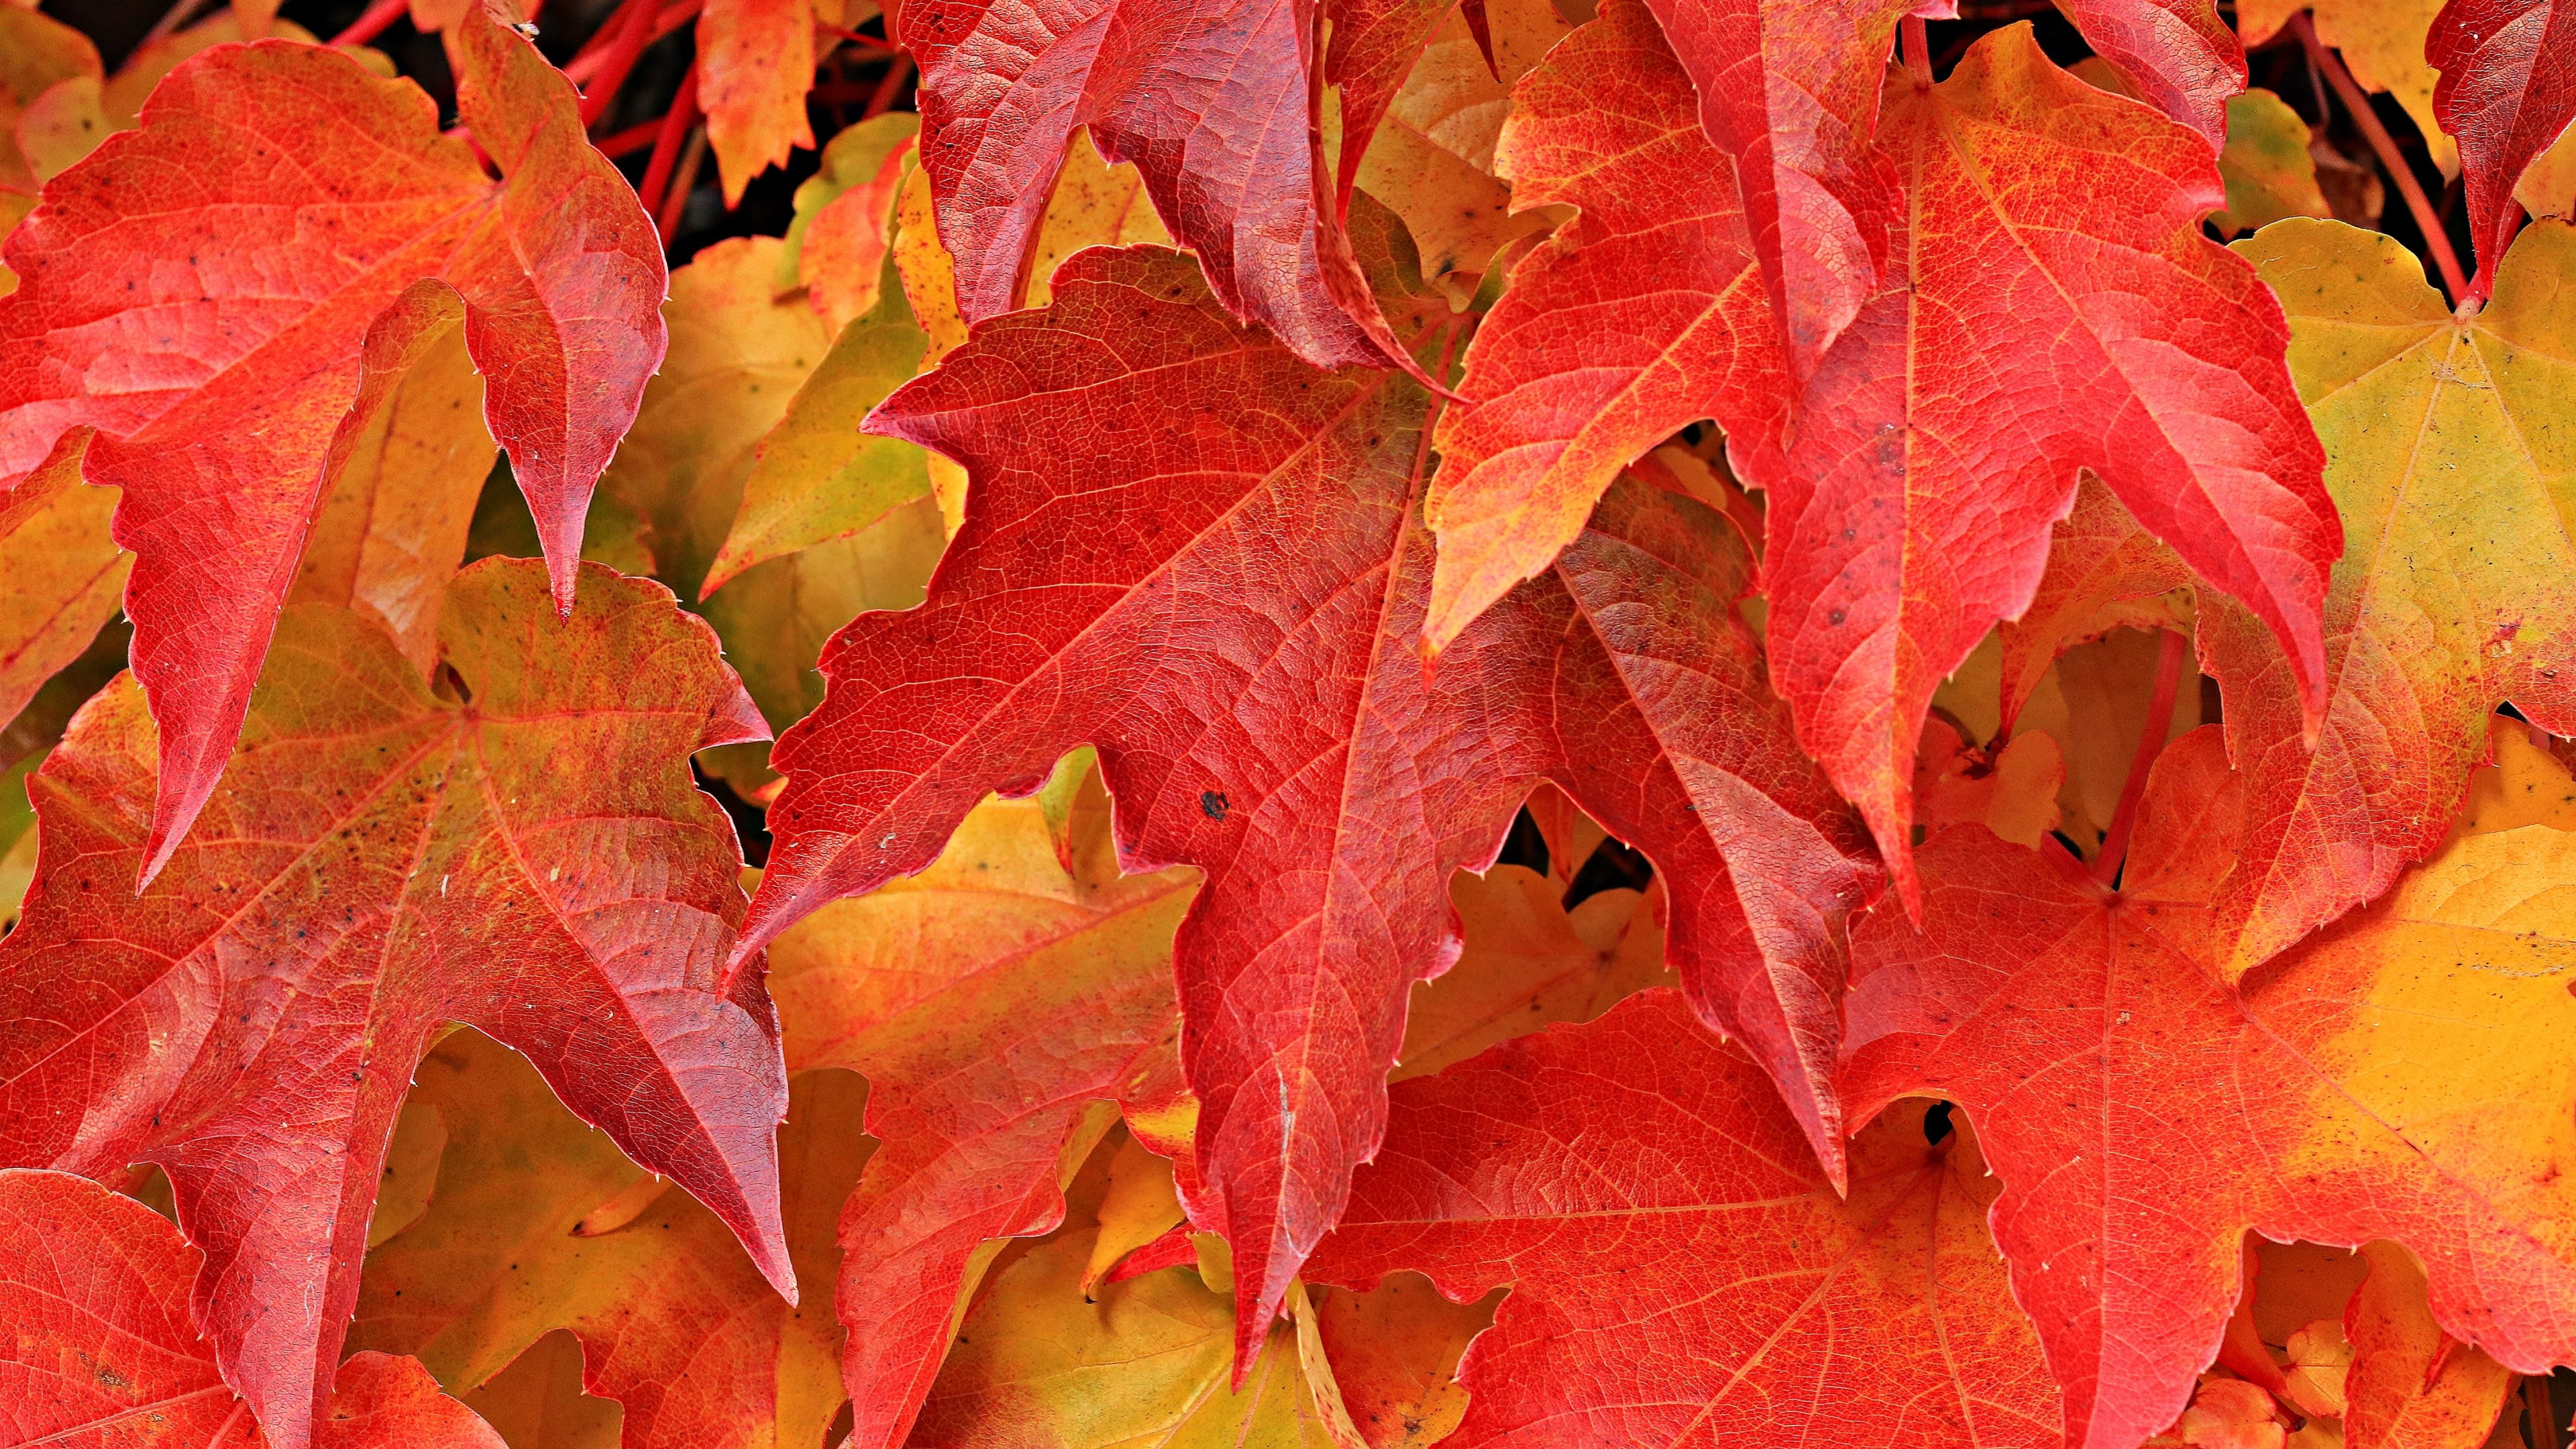 Red Maple Leaves Wallpaper, Android & Desktop Background